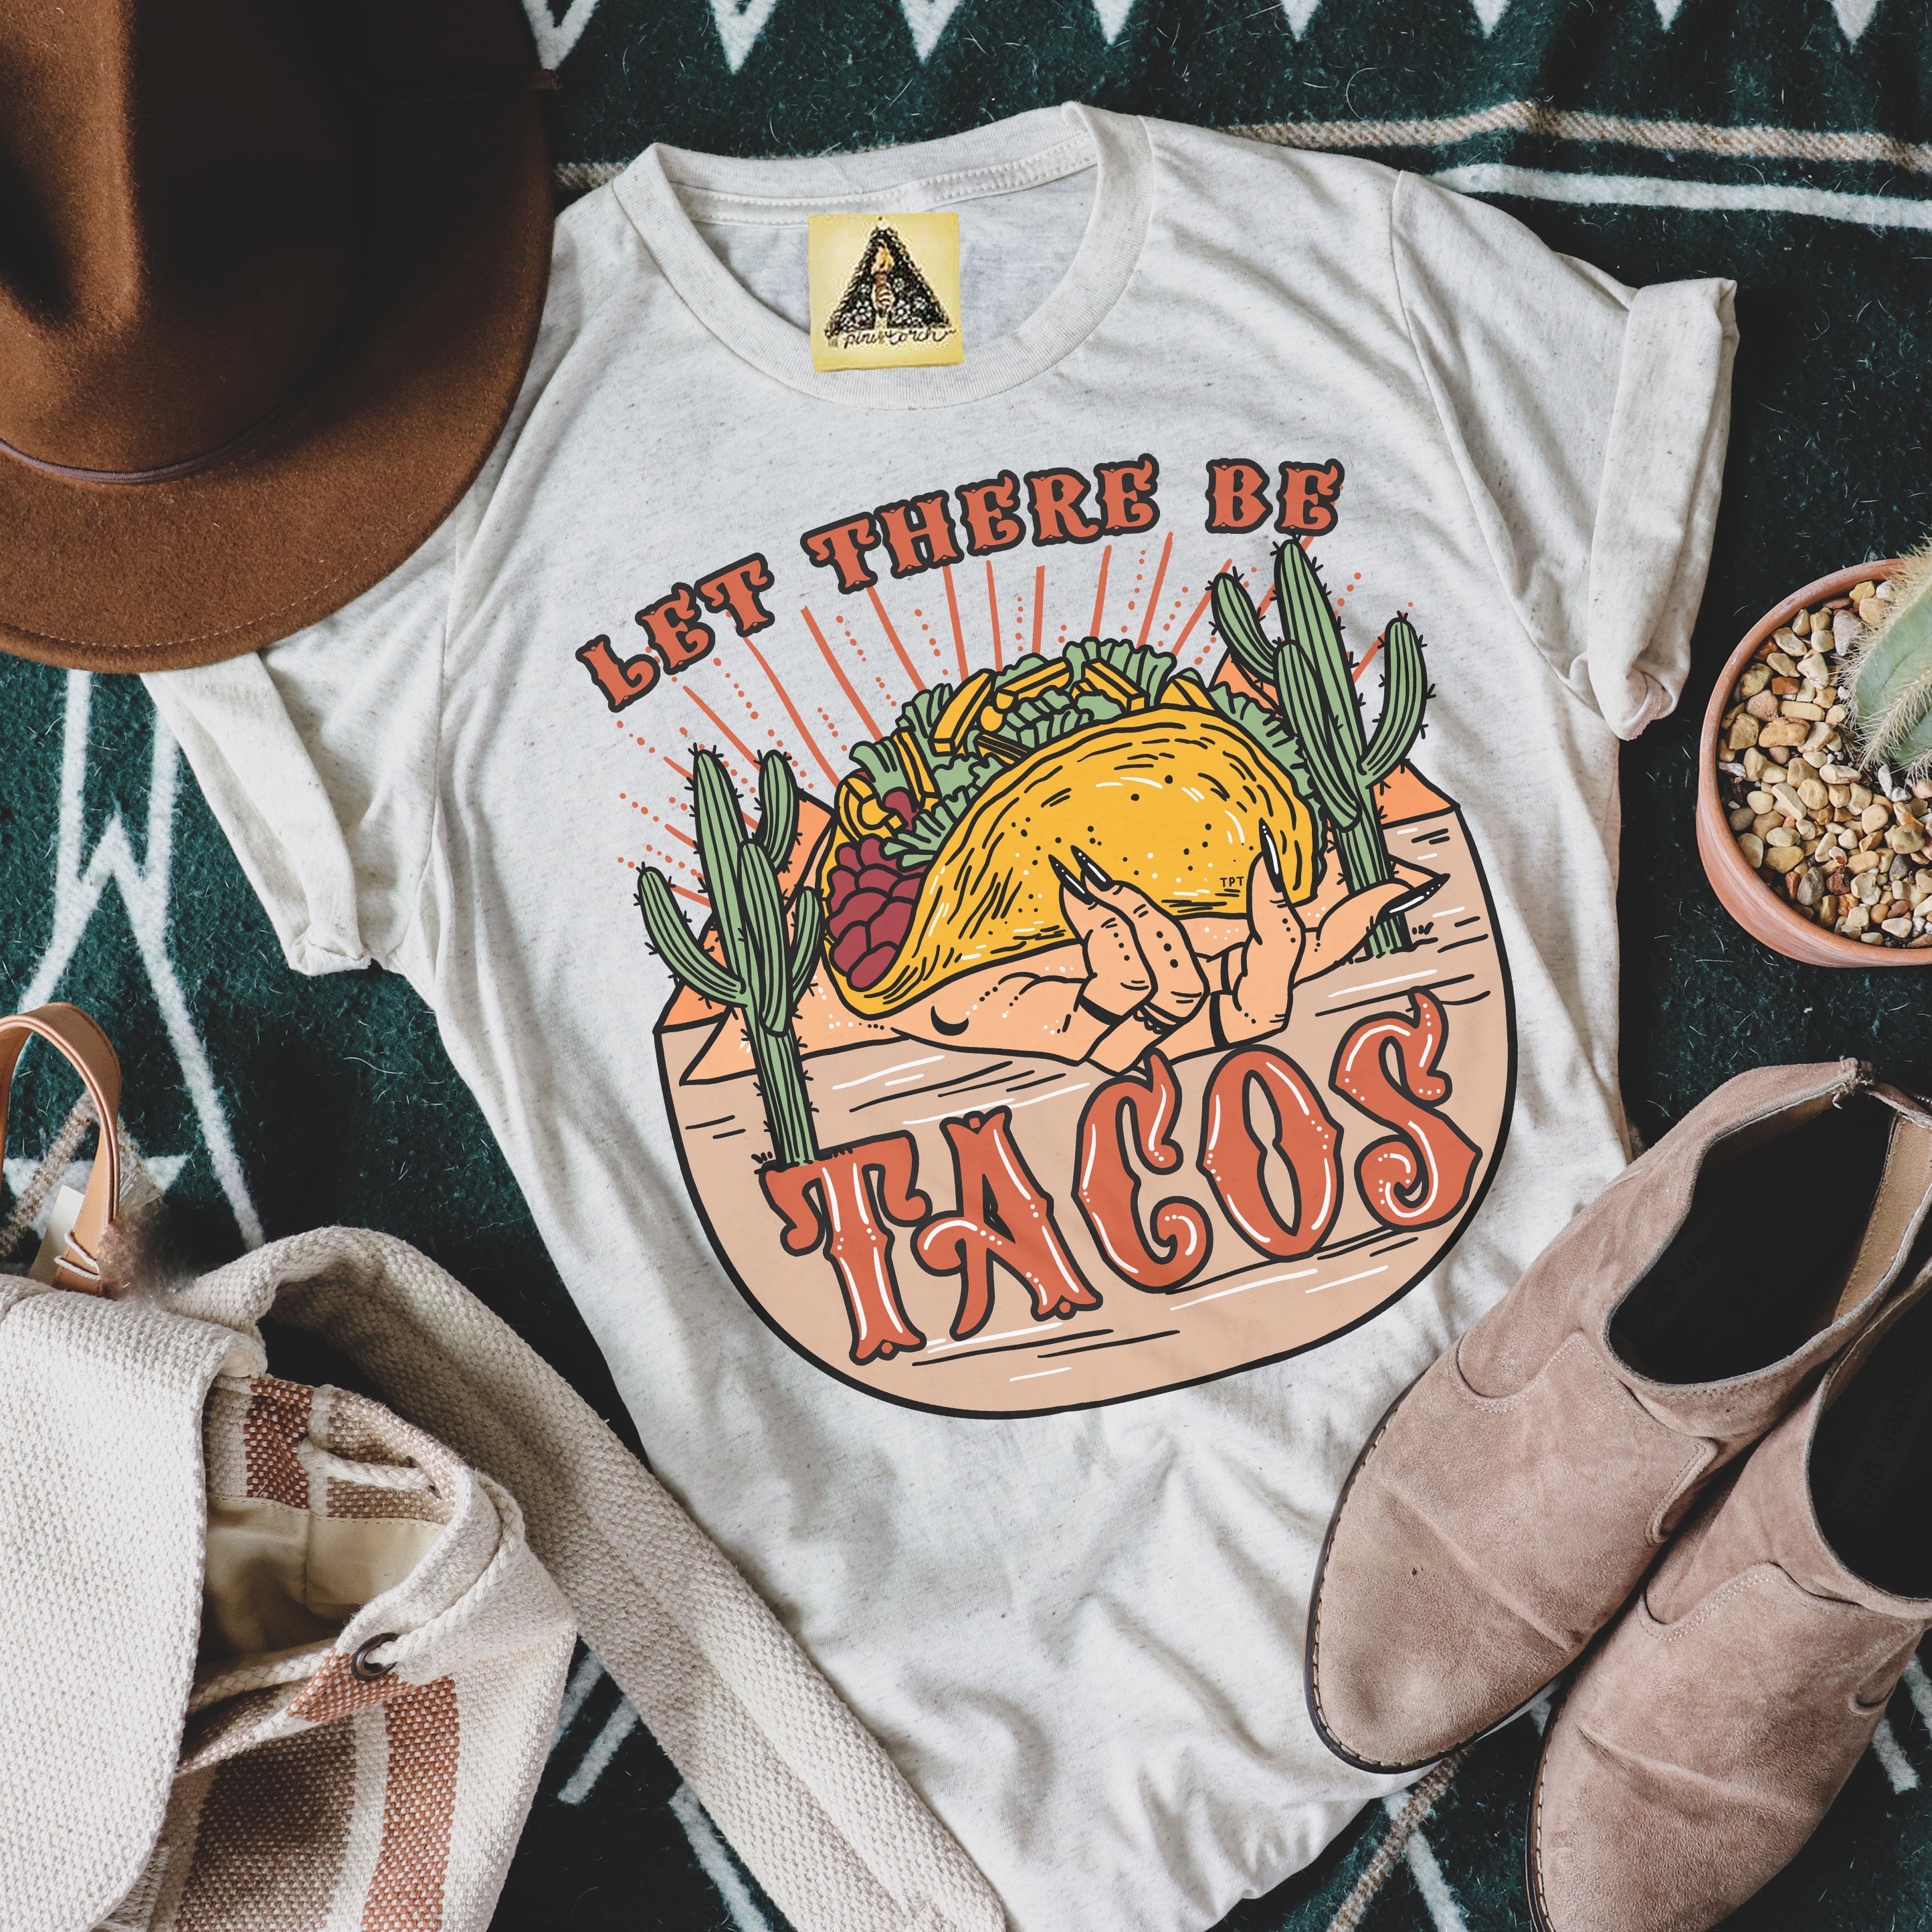 « LET THERE BE TACOS » UNISEX TEE